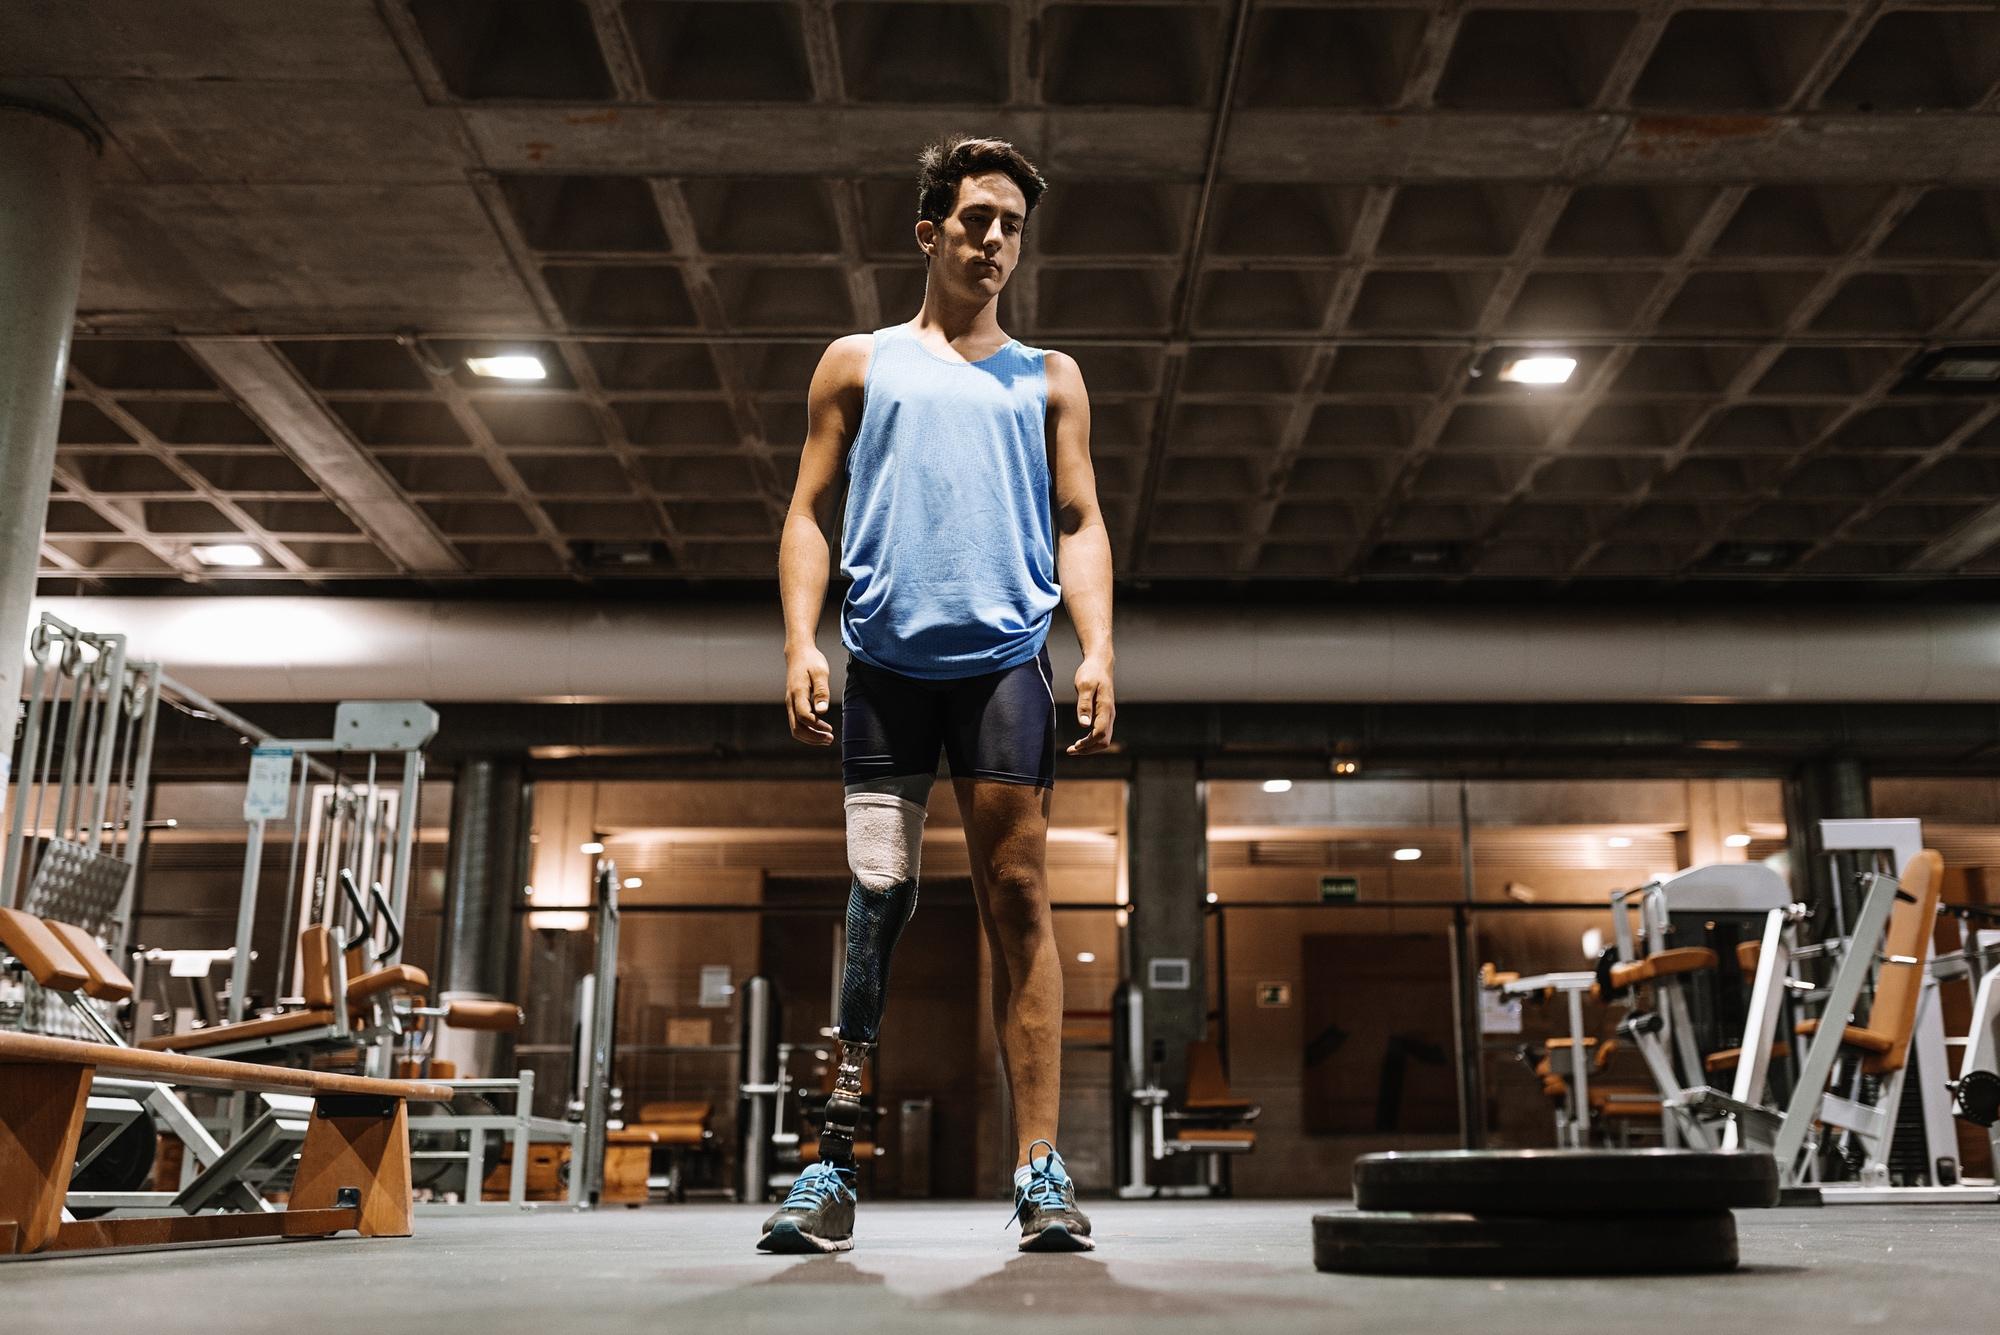 Photo of a person with a prosthetic leg, standing in a gym wearing sports shoes and surrounded by exercise equipment